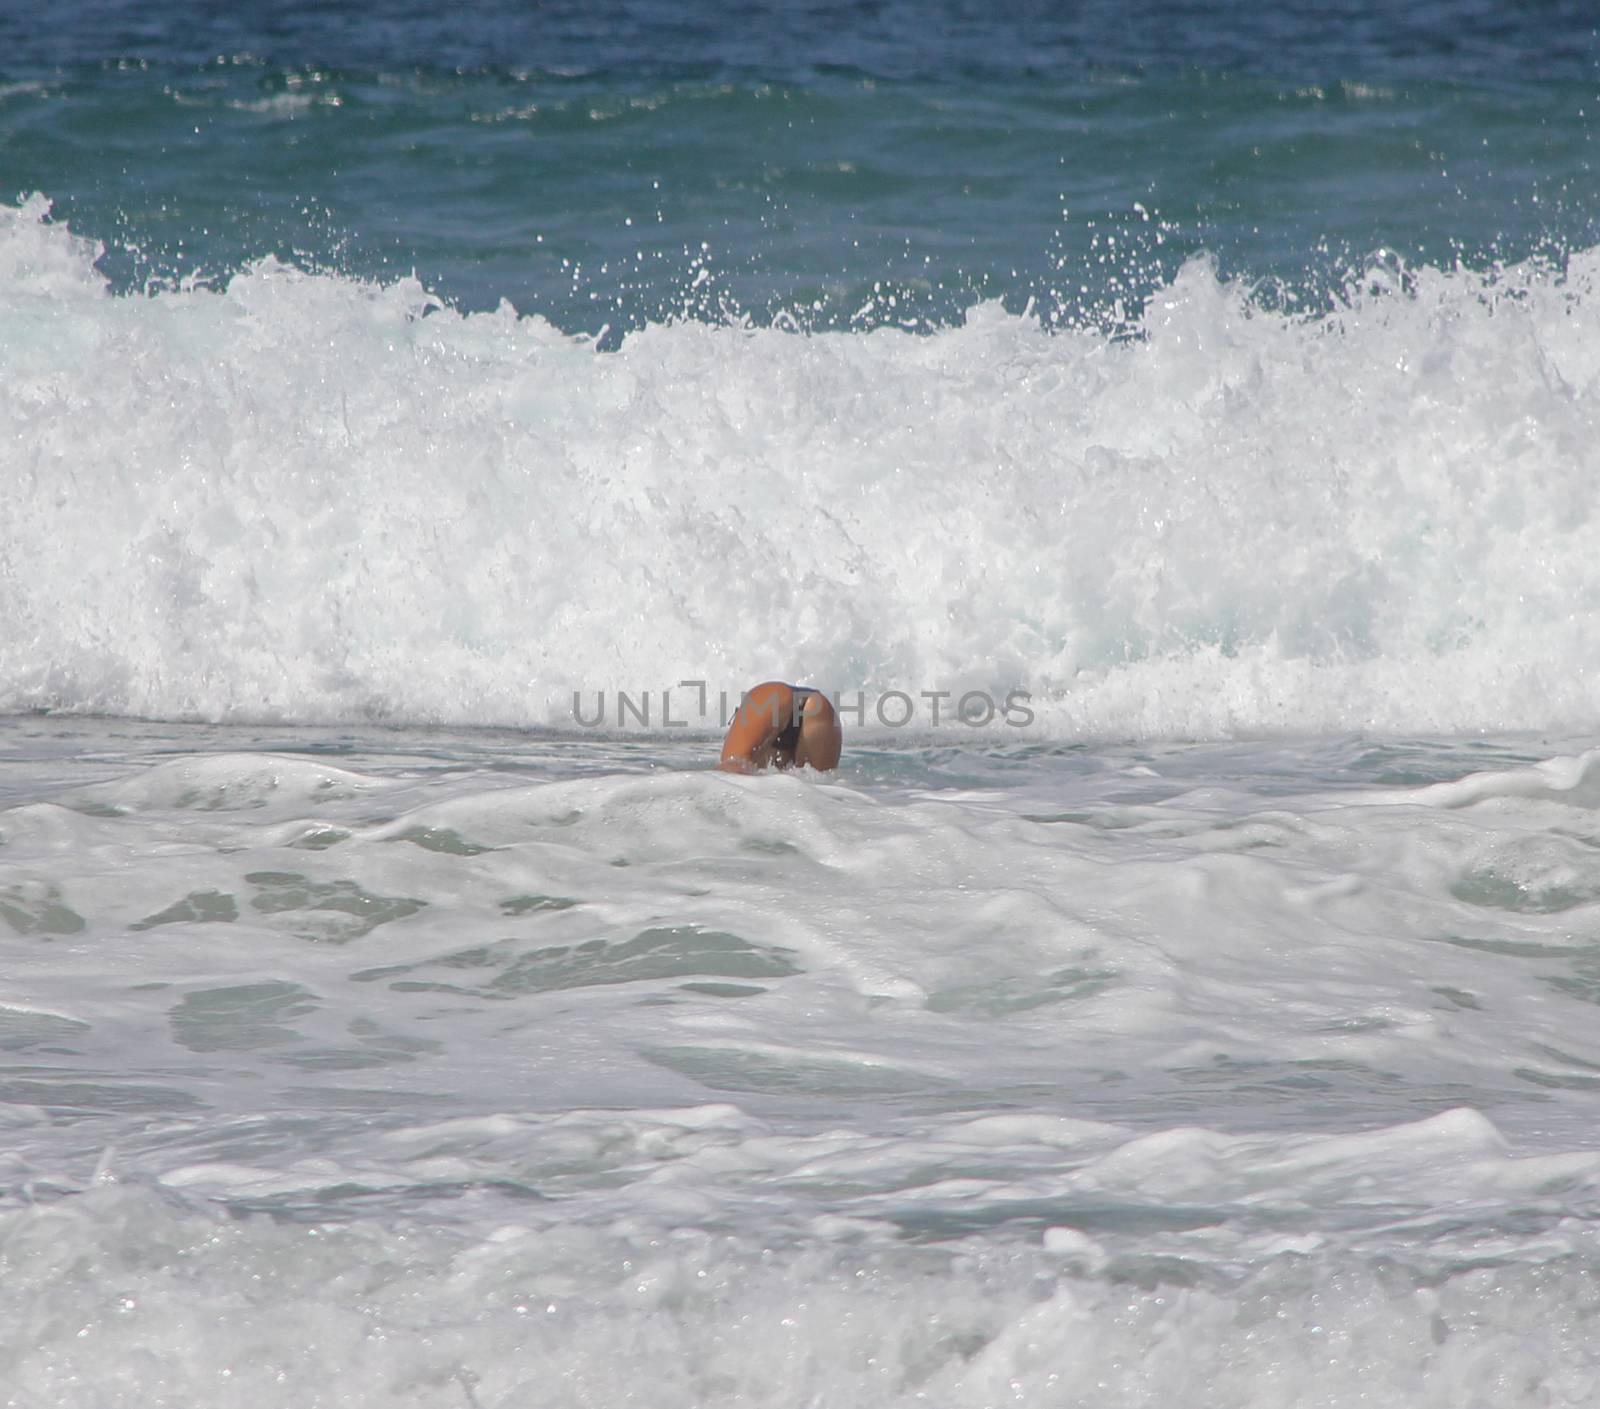 A young lady swimming in the surf in Puerto Escondido, Mexico
01 Apr 2013
No model release
Editorial only